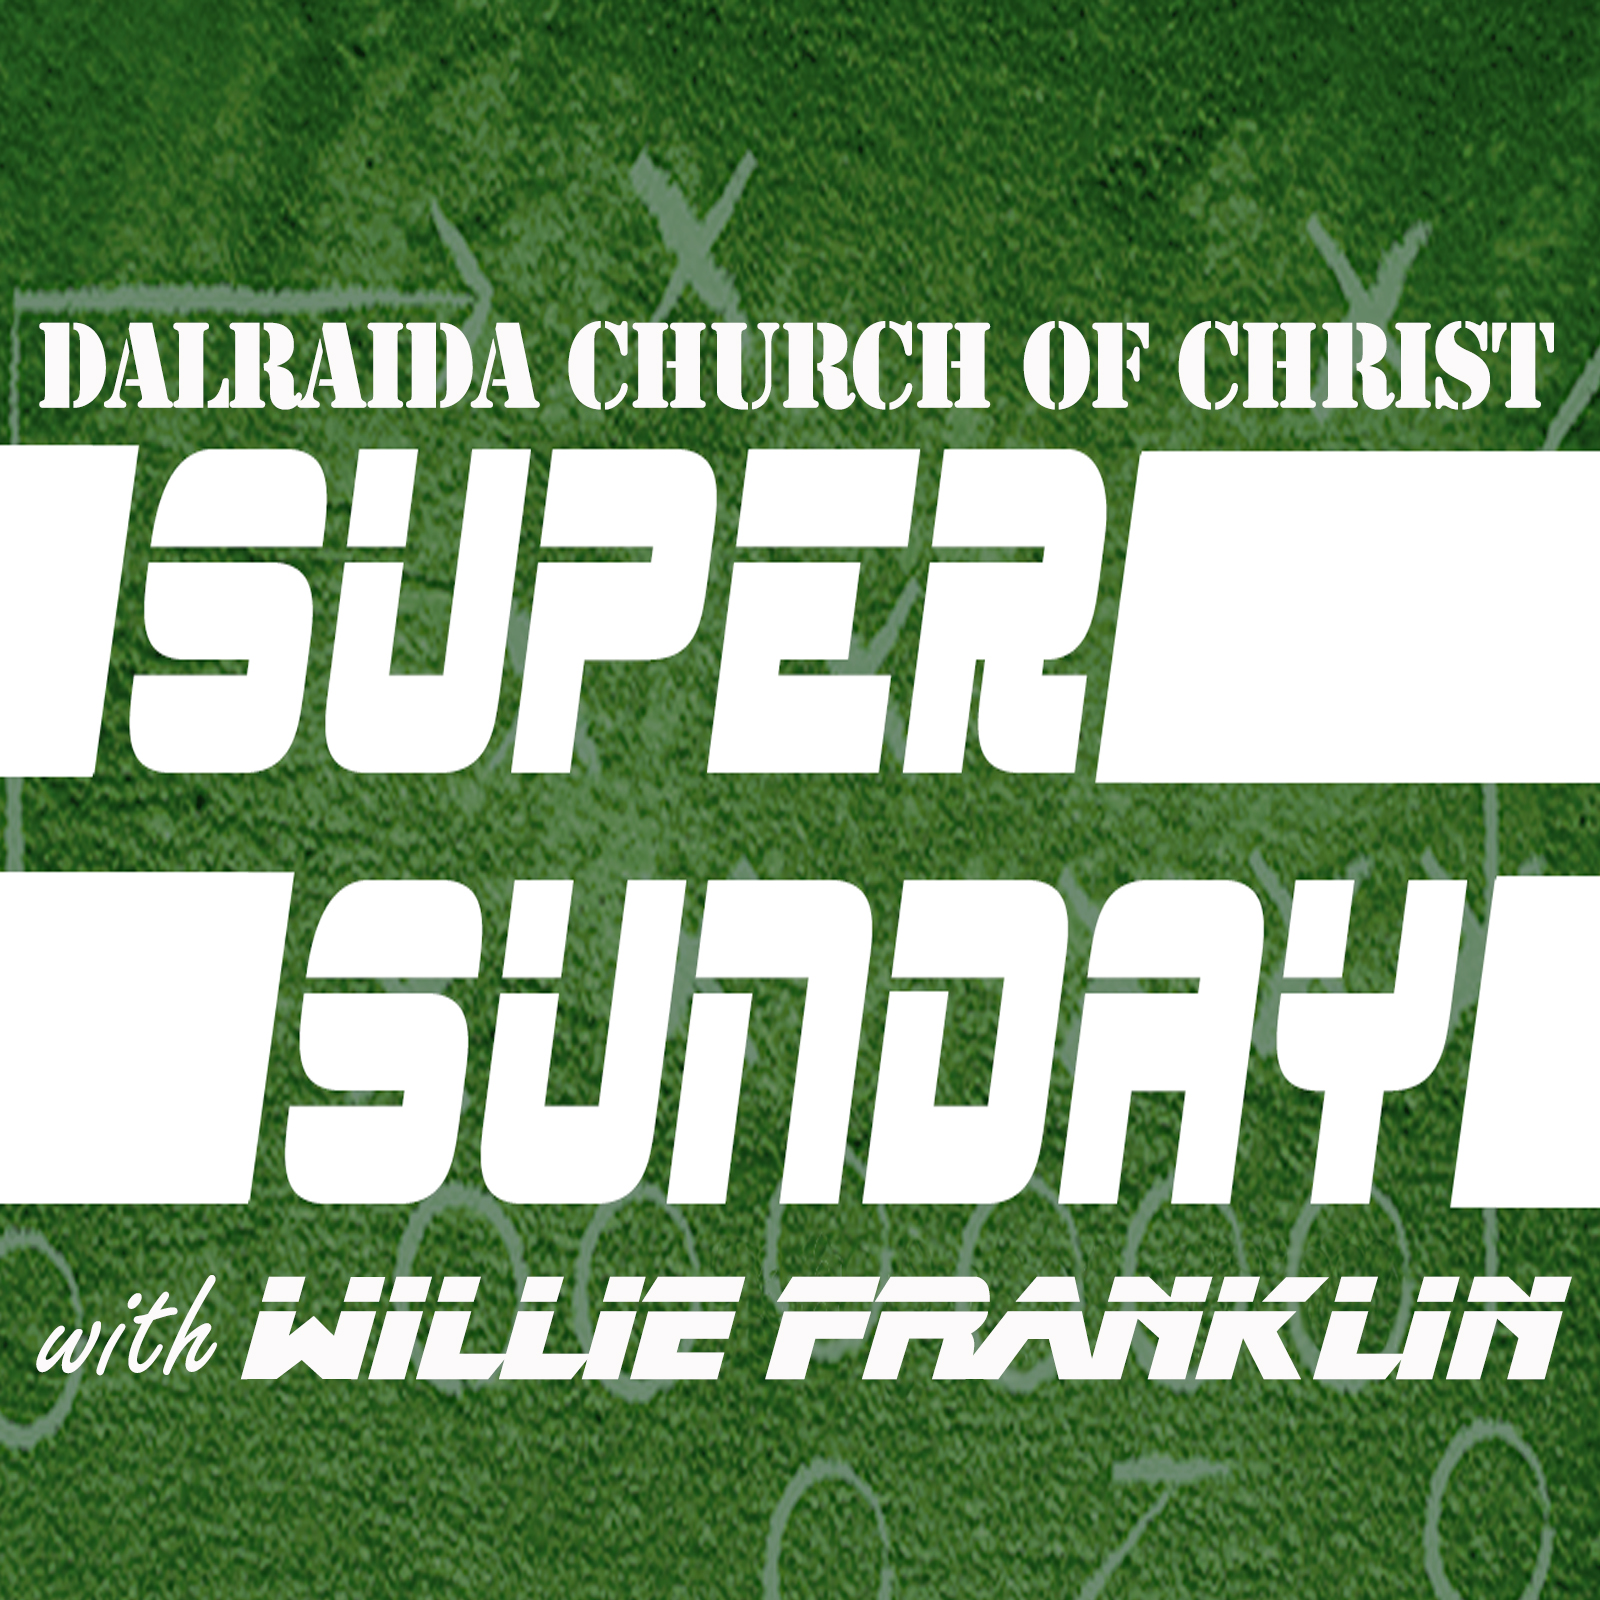 Super Sunday (with Willie Franklin)